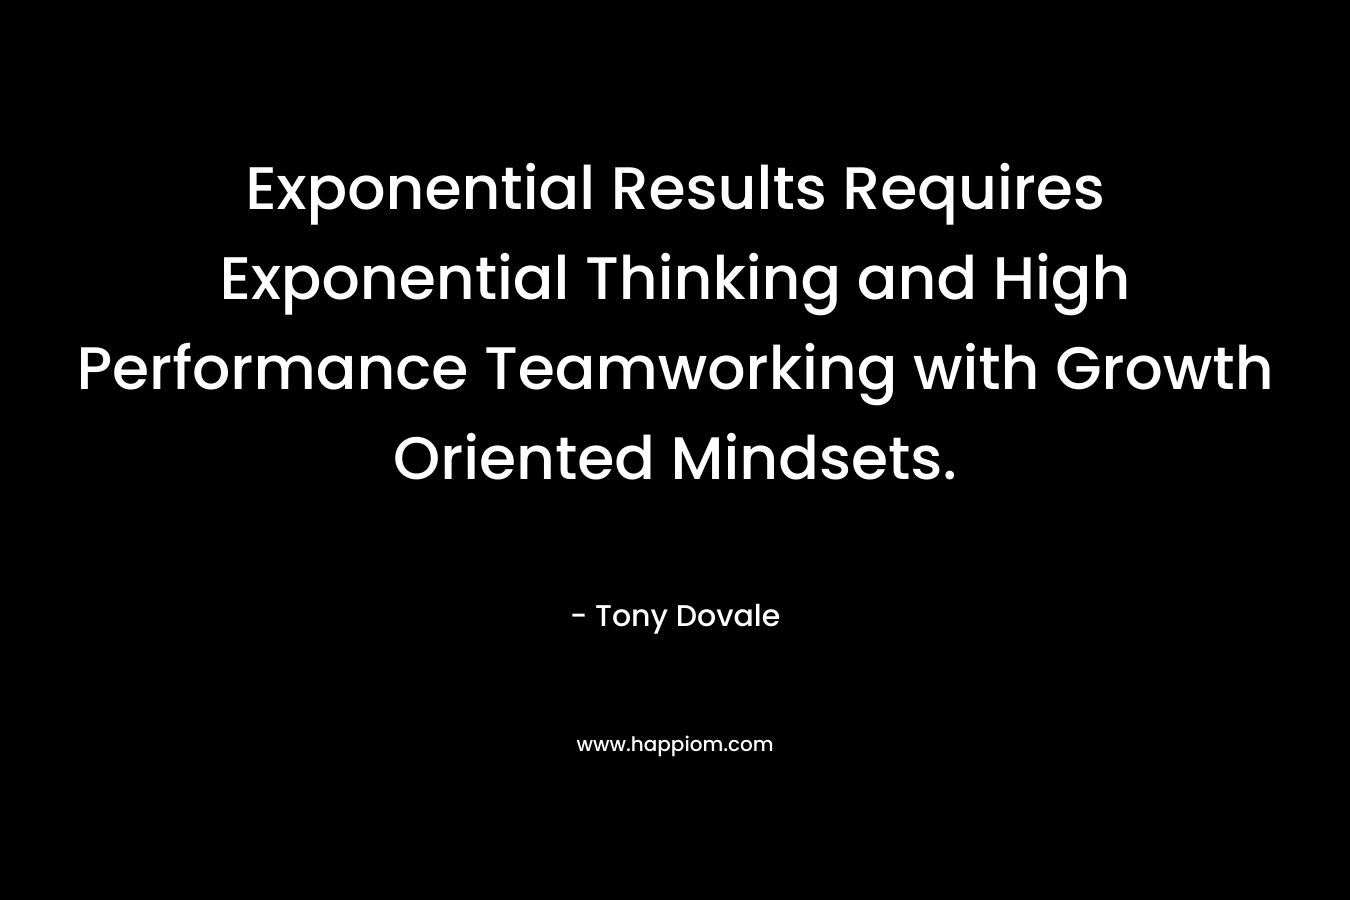 Exponential Results Requires Exponential Thinking and High Performance Teamworking with Growth Oriented Mindsets. – Tony Dovale